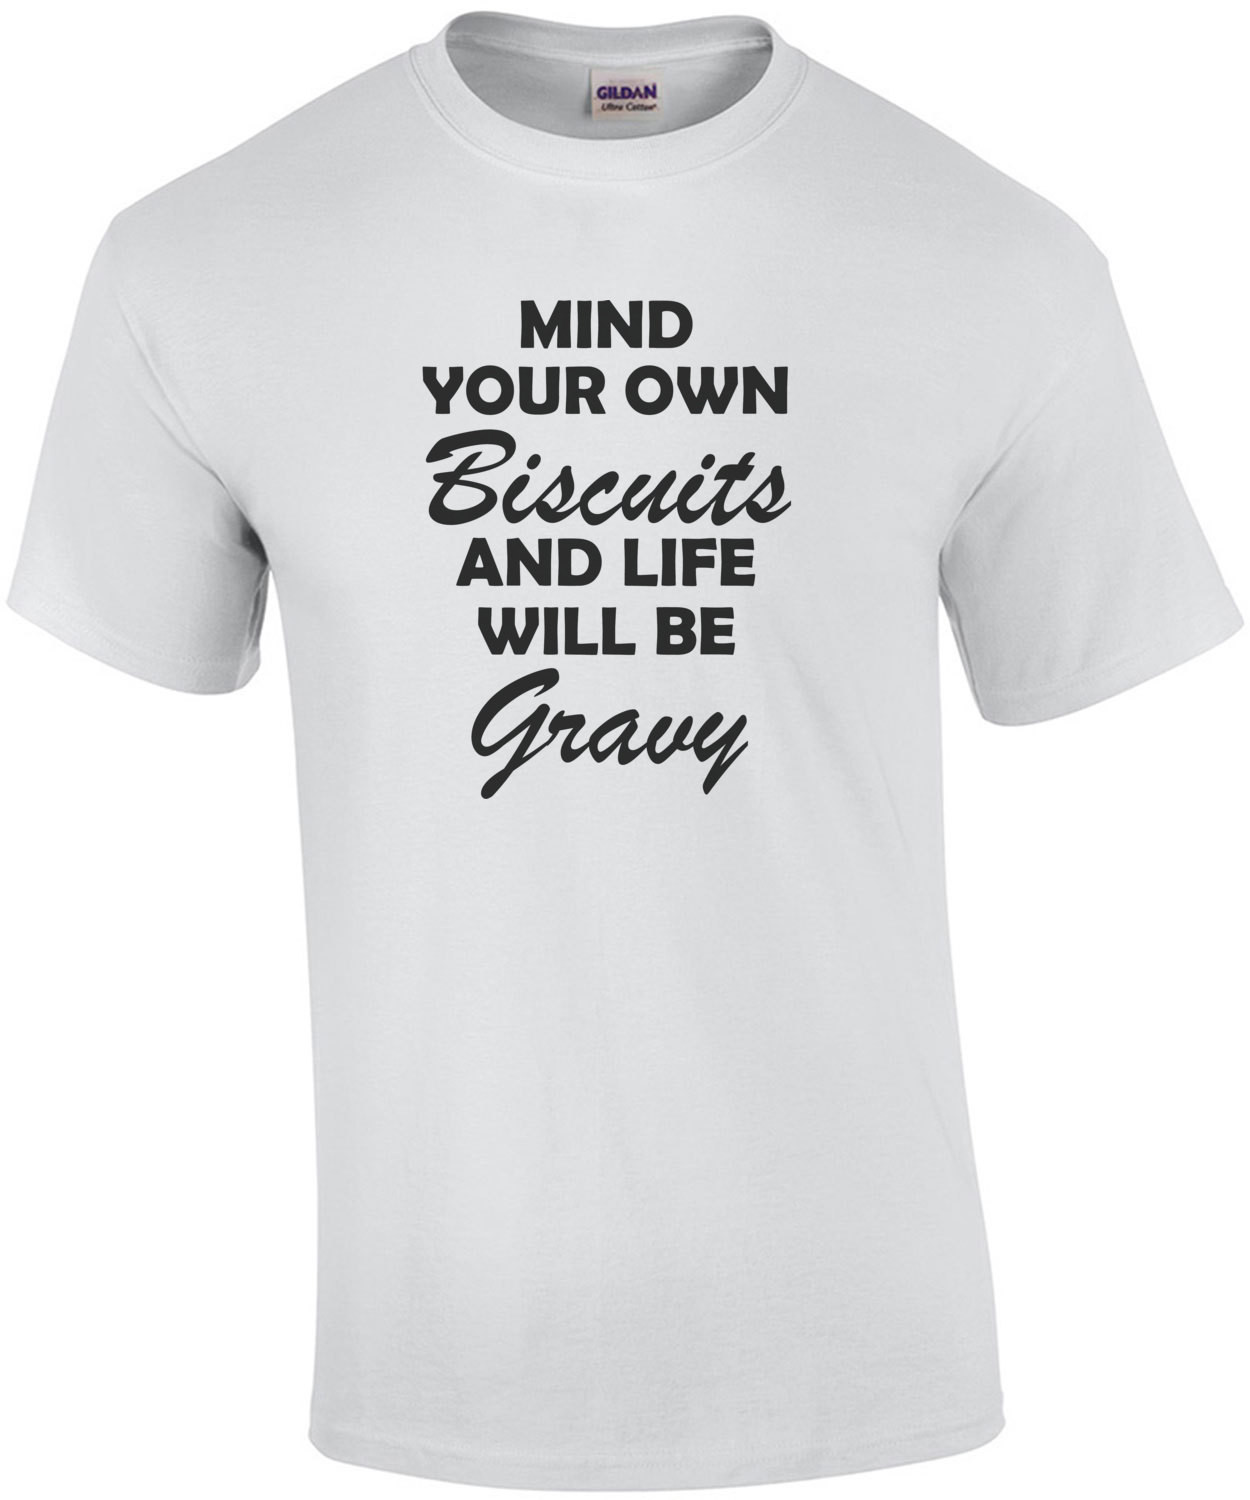 Mind your own biscuits and life will be gravy t-shirt